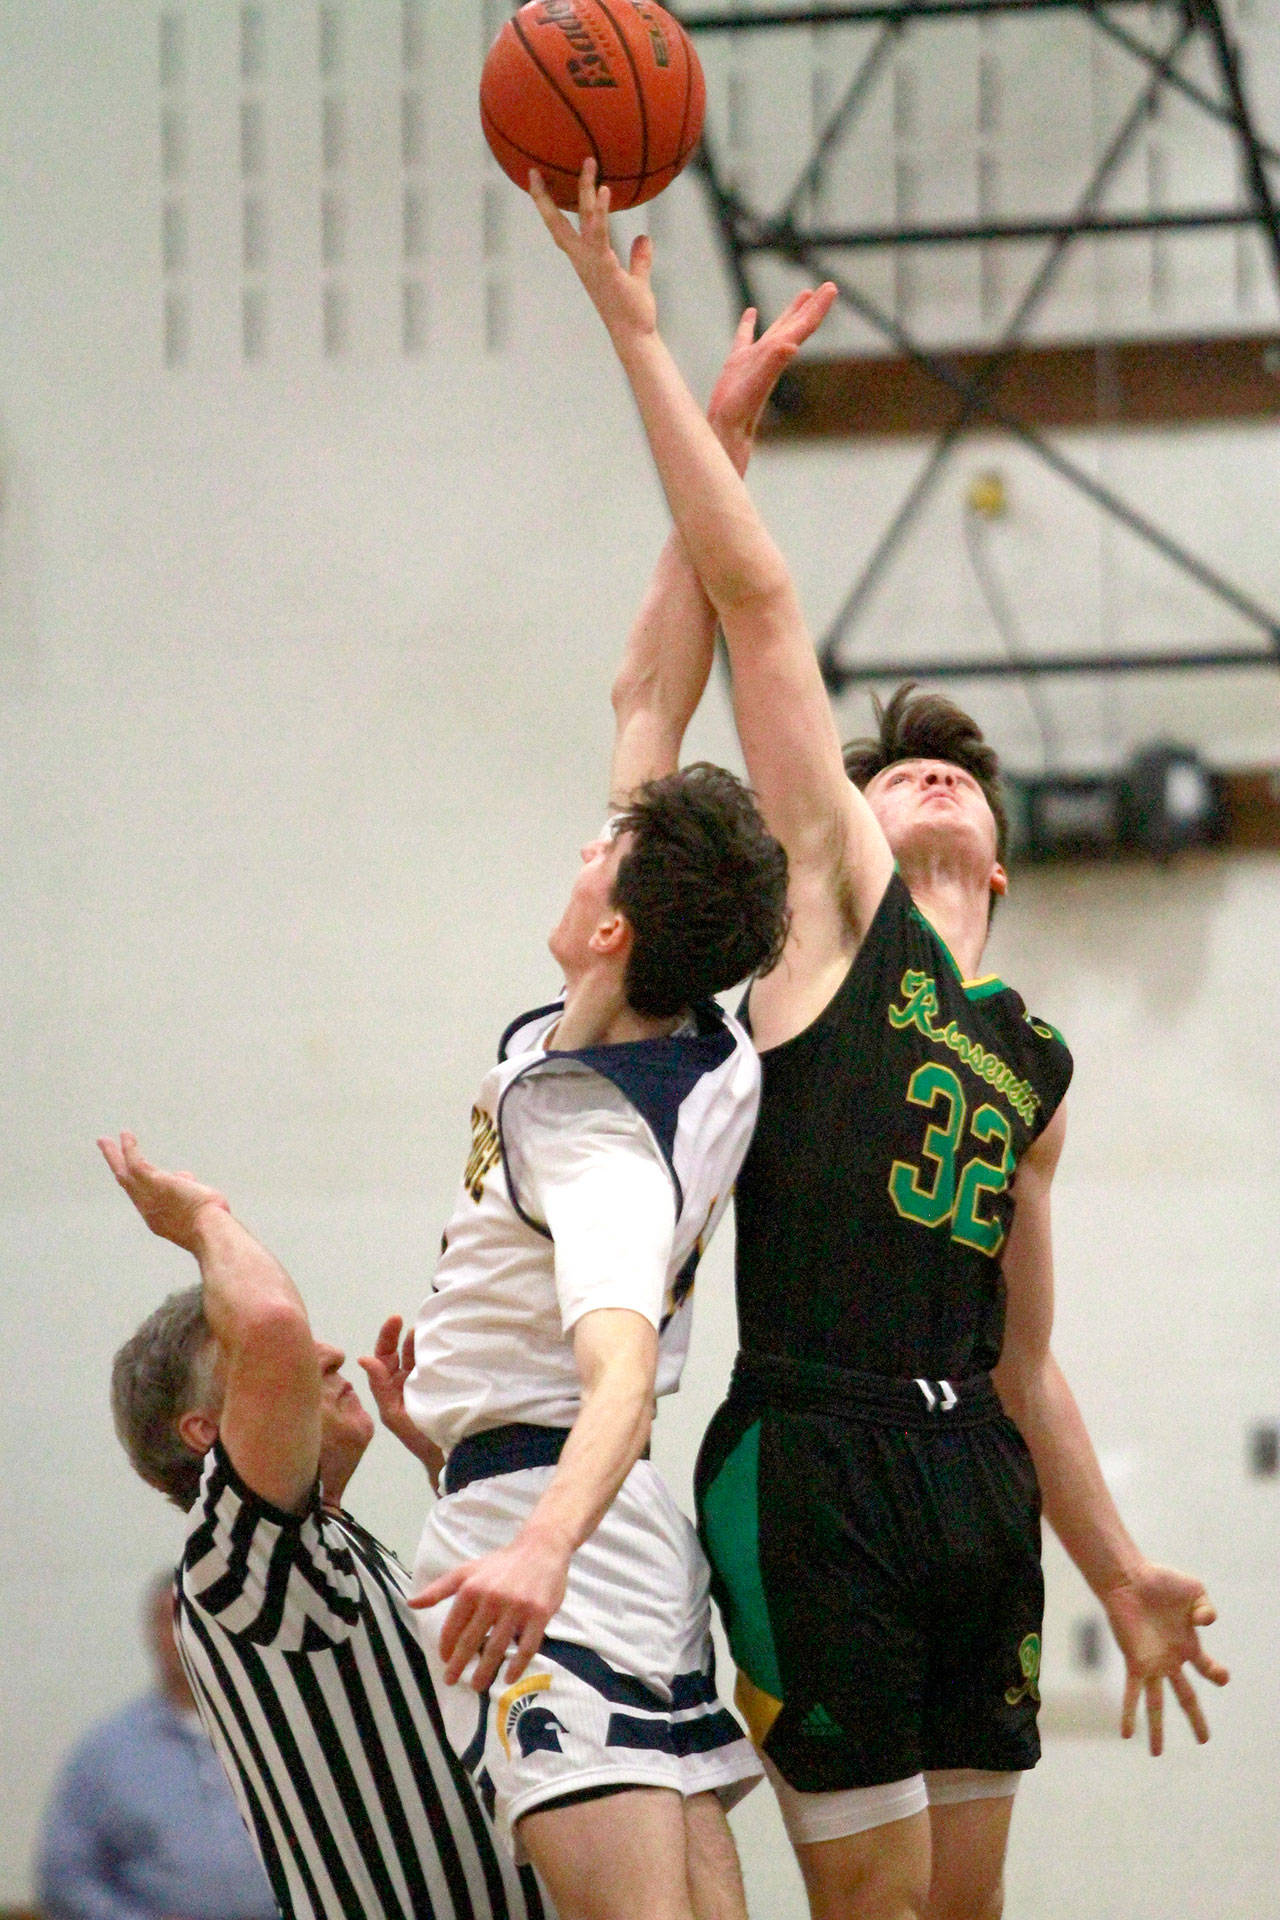 Bainbridge boys fight to a basketball win against Rough Riders | Photo gallery